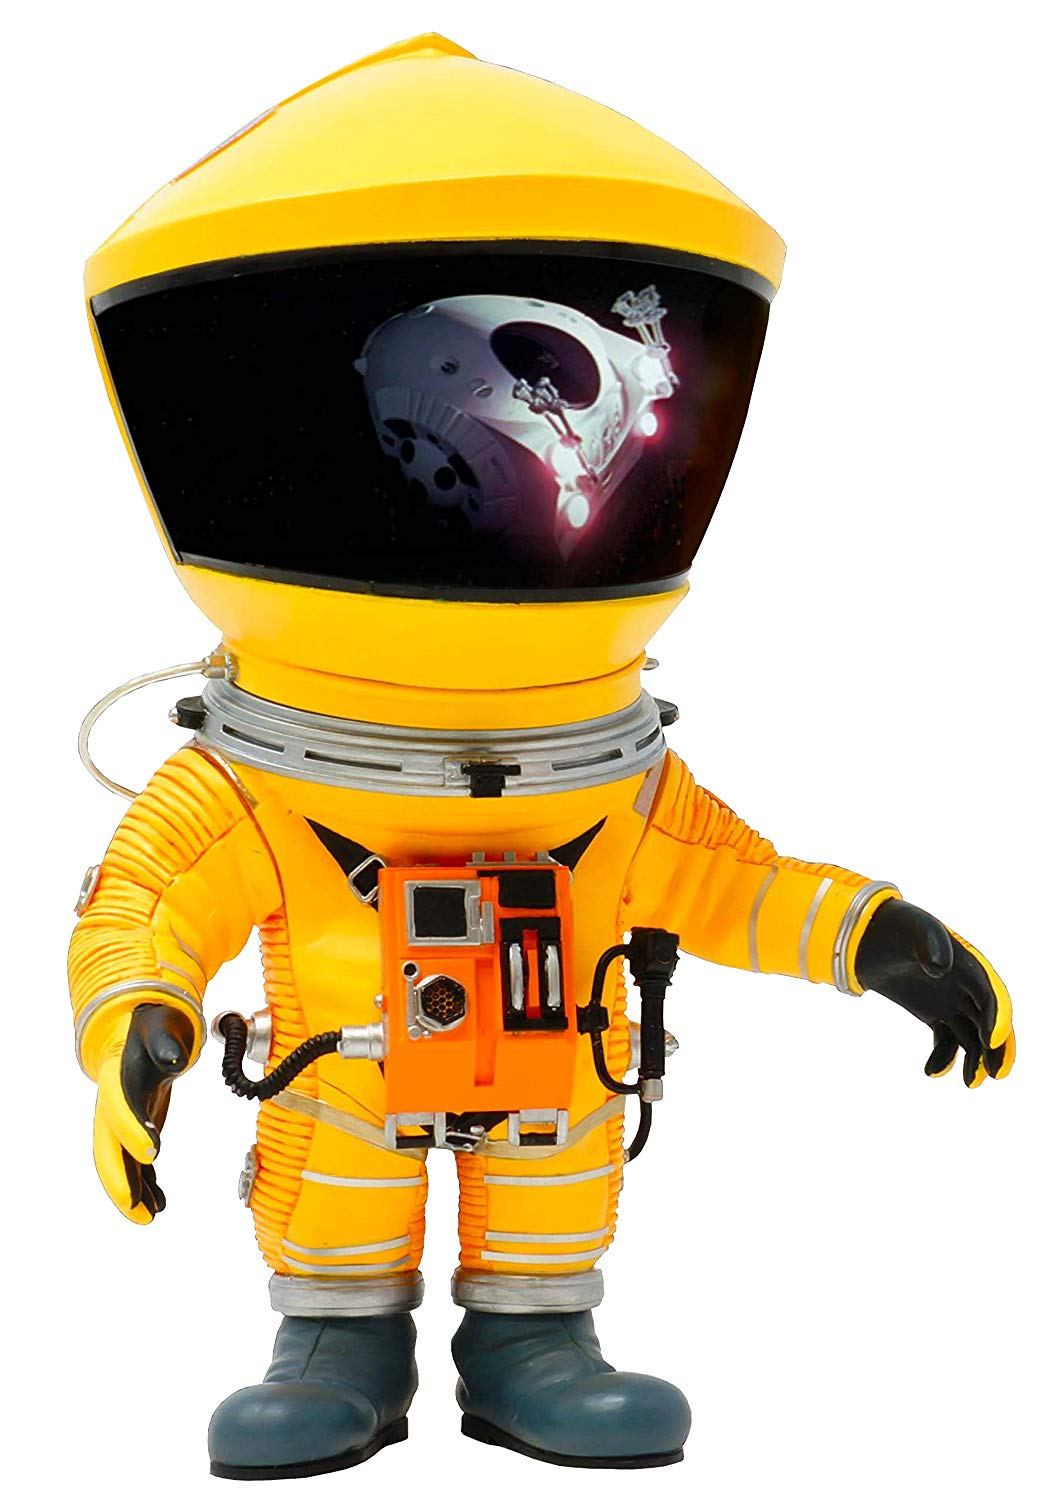 DEFOREAL 2001 A SPACE ODYSSEY: DISCOVERY ASTRONAUT YELLOW SPACE SUIT VER. Star Ace Toys